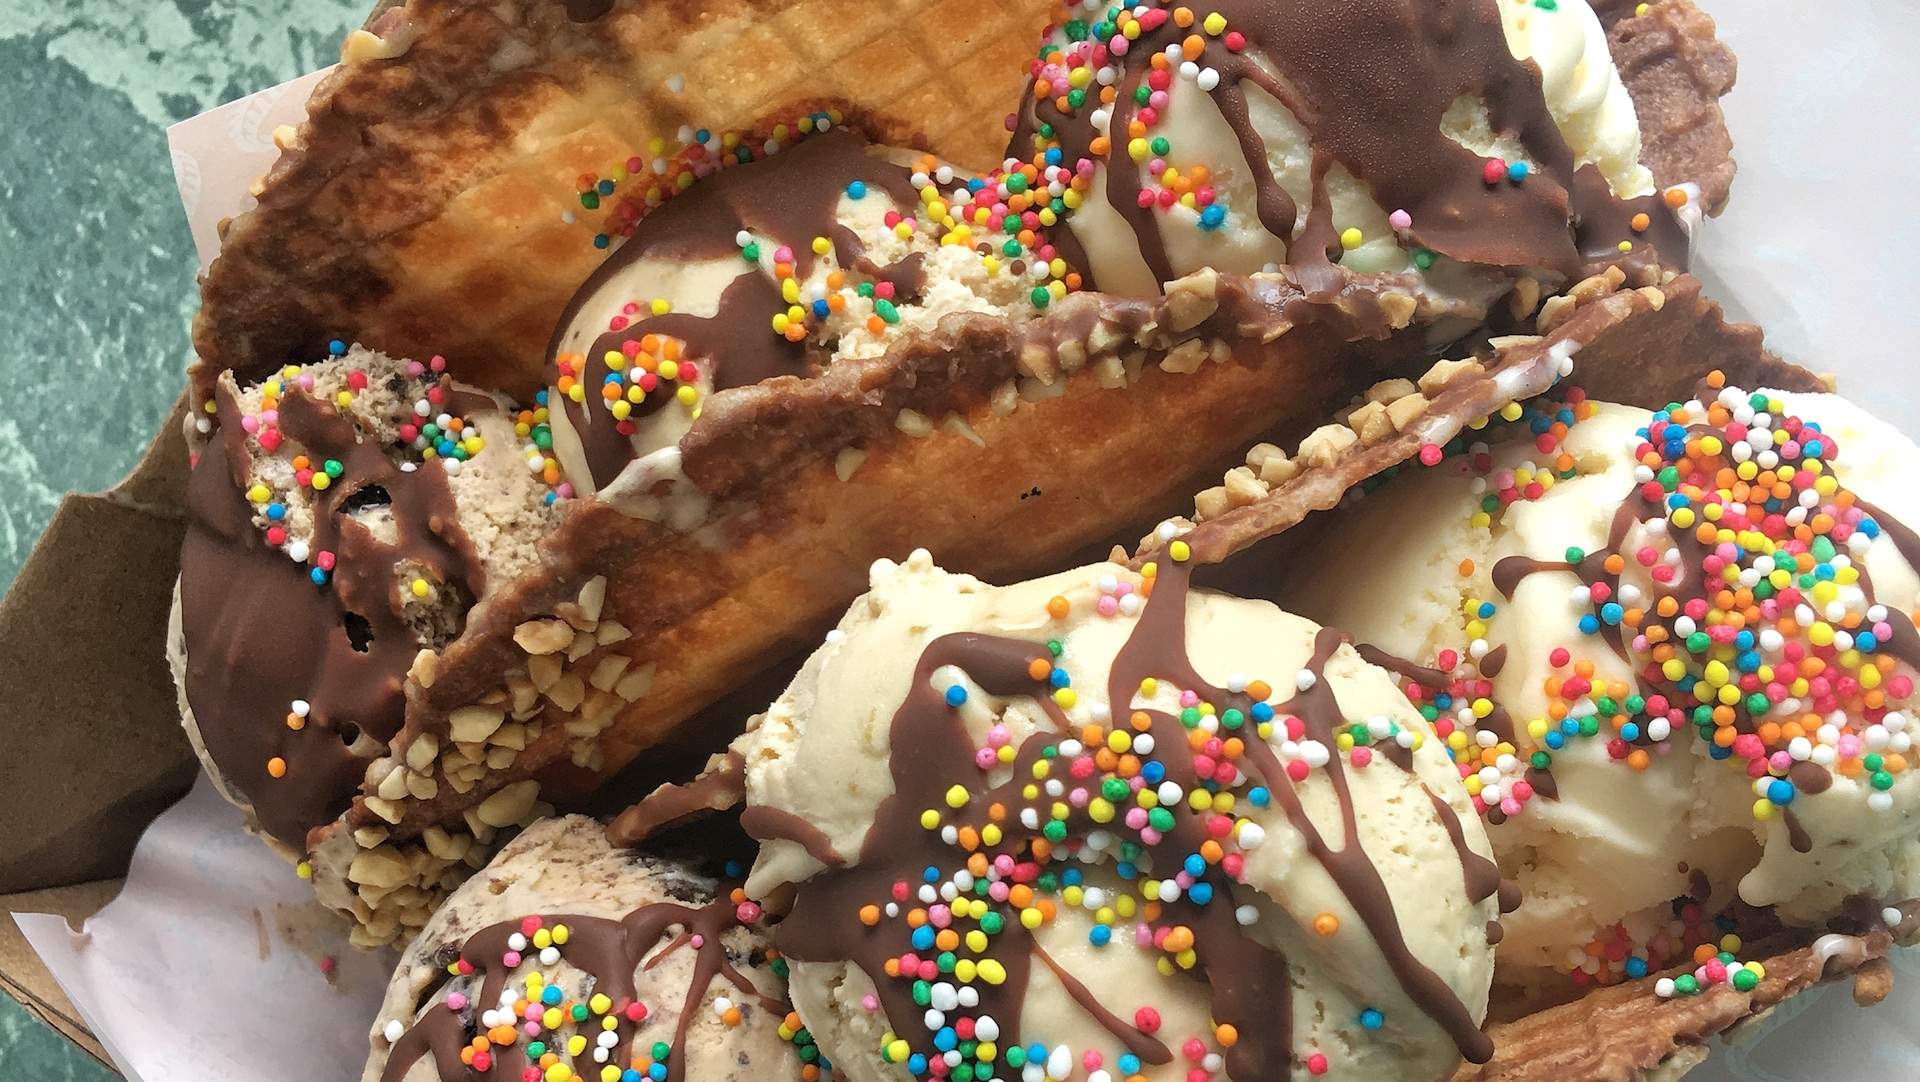 The King of Cheat Meals and Melt Create an Ice Cream Taco